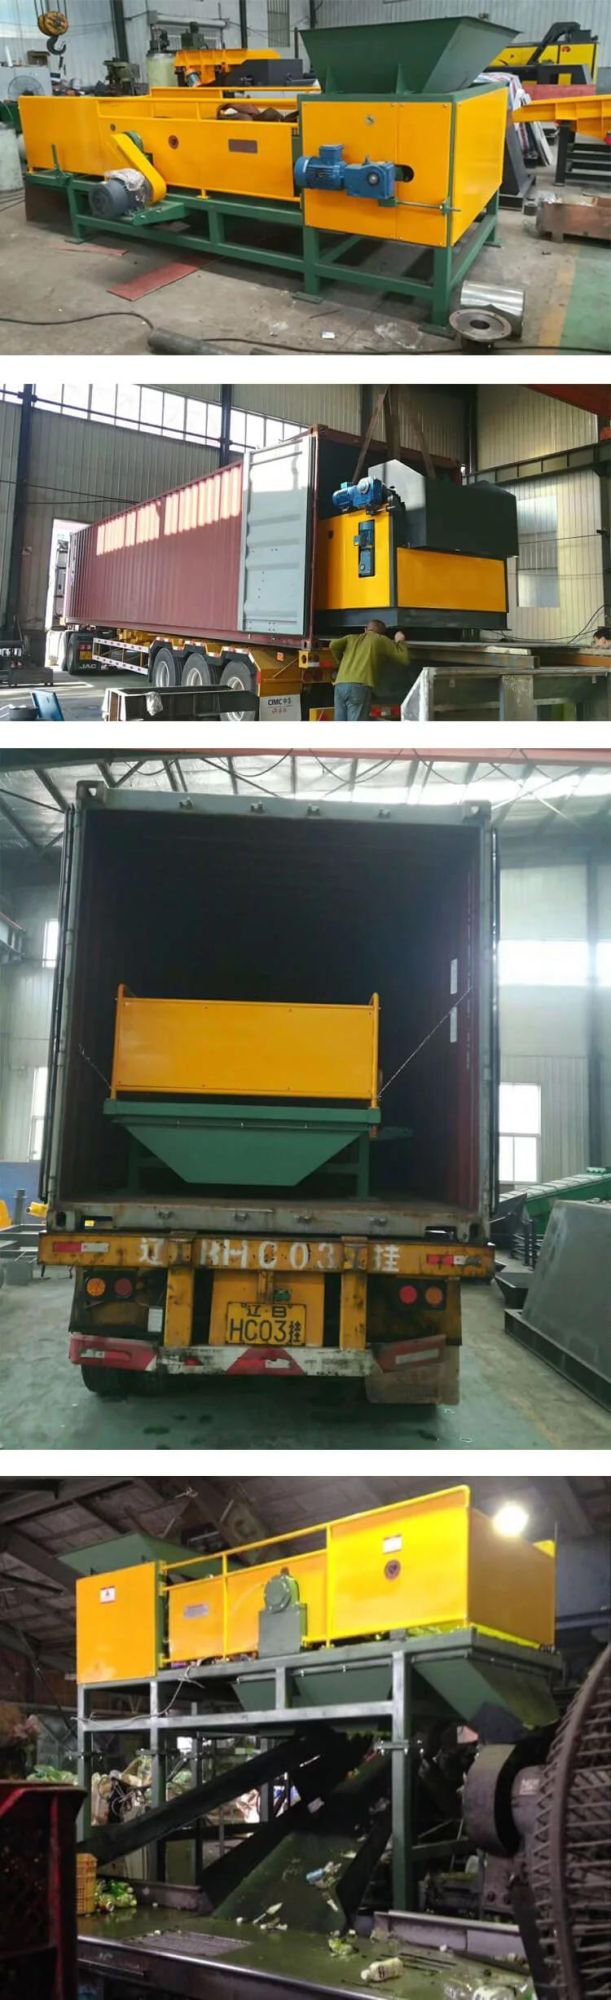 Vortex Separator Is Used for Metal Separation Recycling Machine for The Separation of Pet Bottle Aluminum Cans and Iron Cans